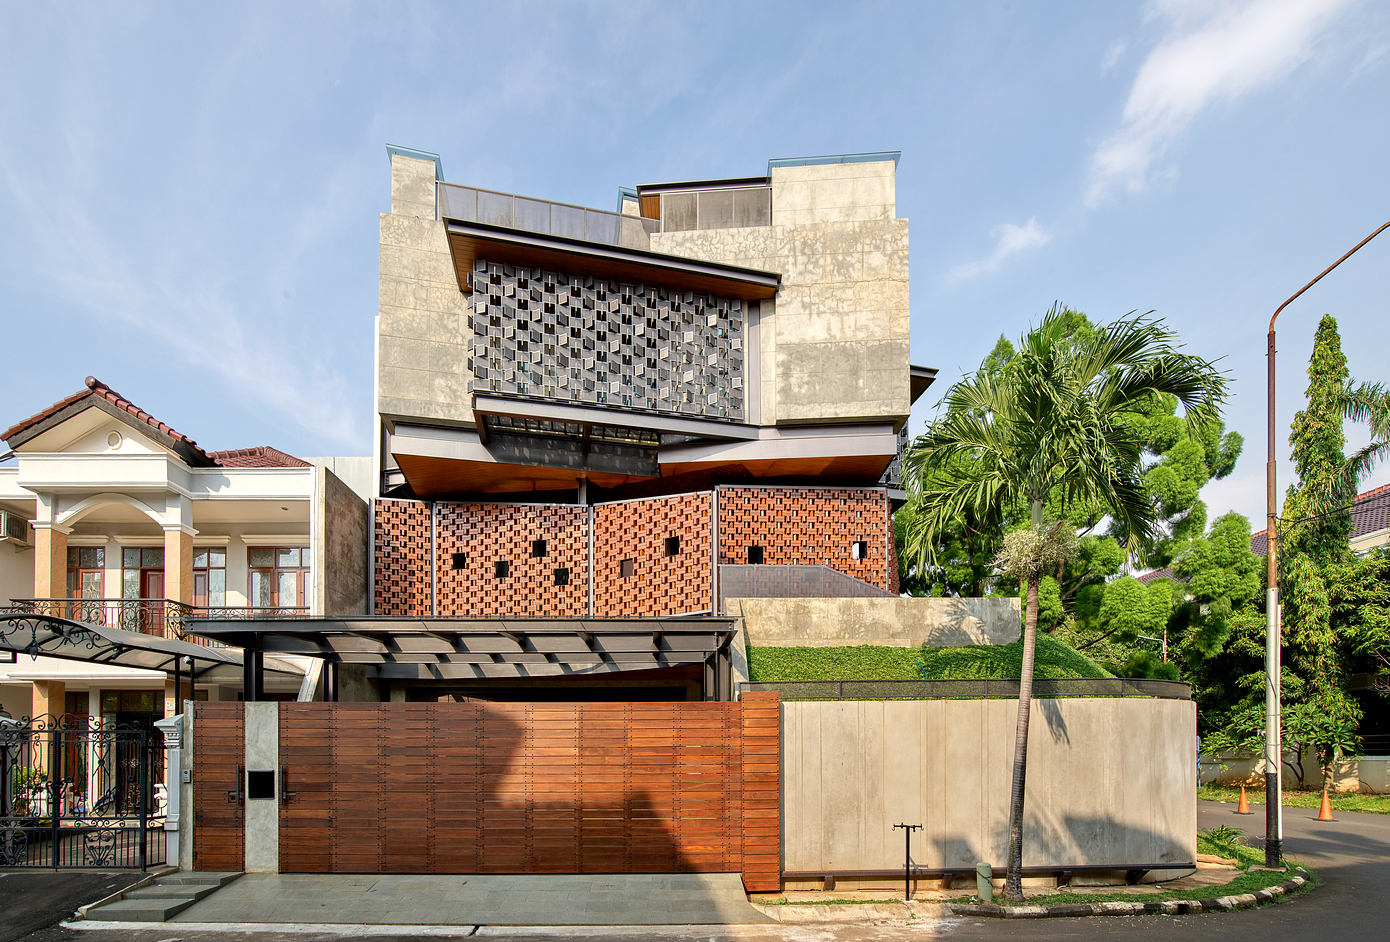 Sarang Nest House: Innovative Residential Architecture in Indonesia